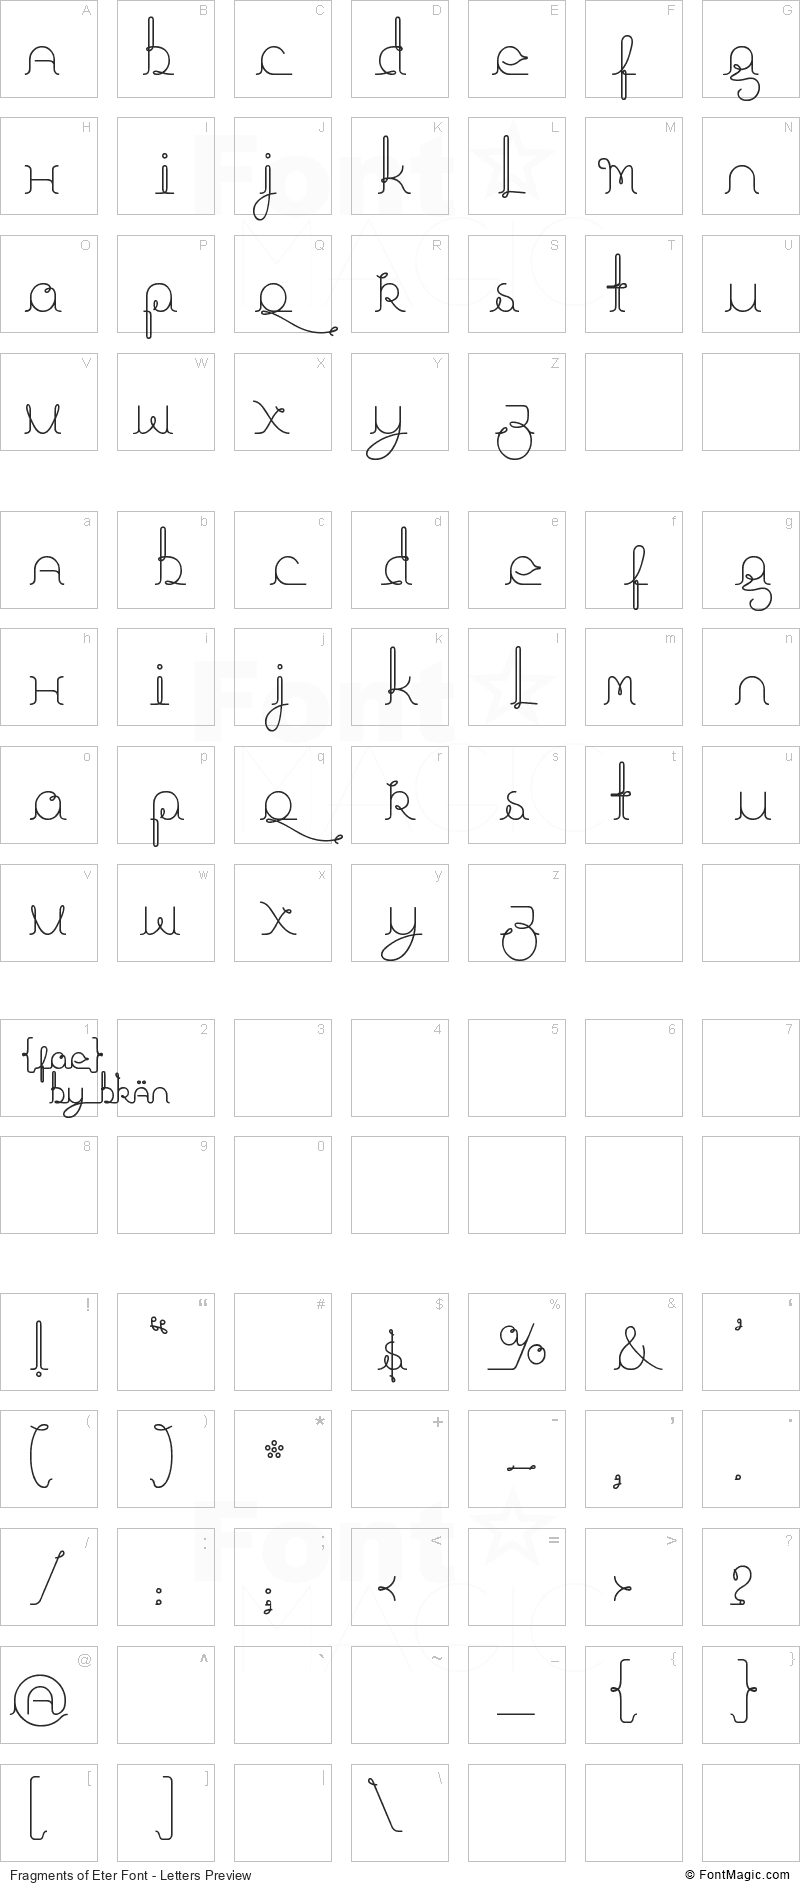 Fragments of Eter Font - All Latters Preview Chart